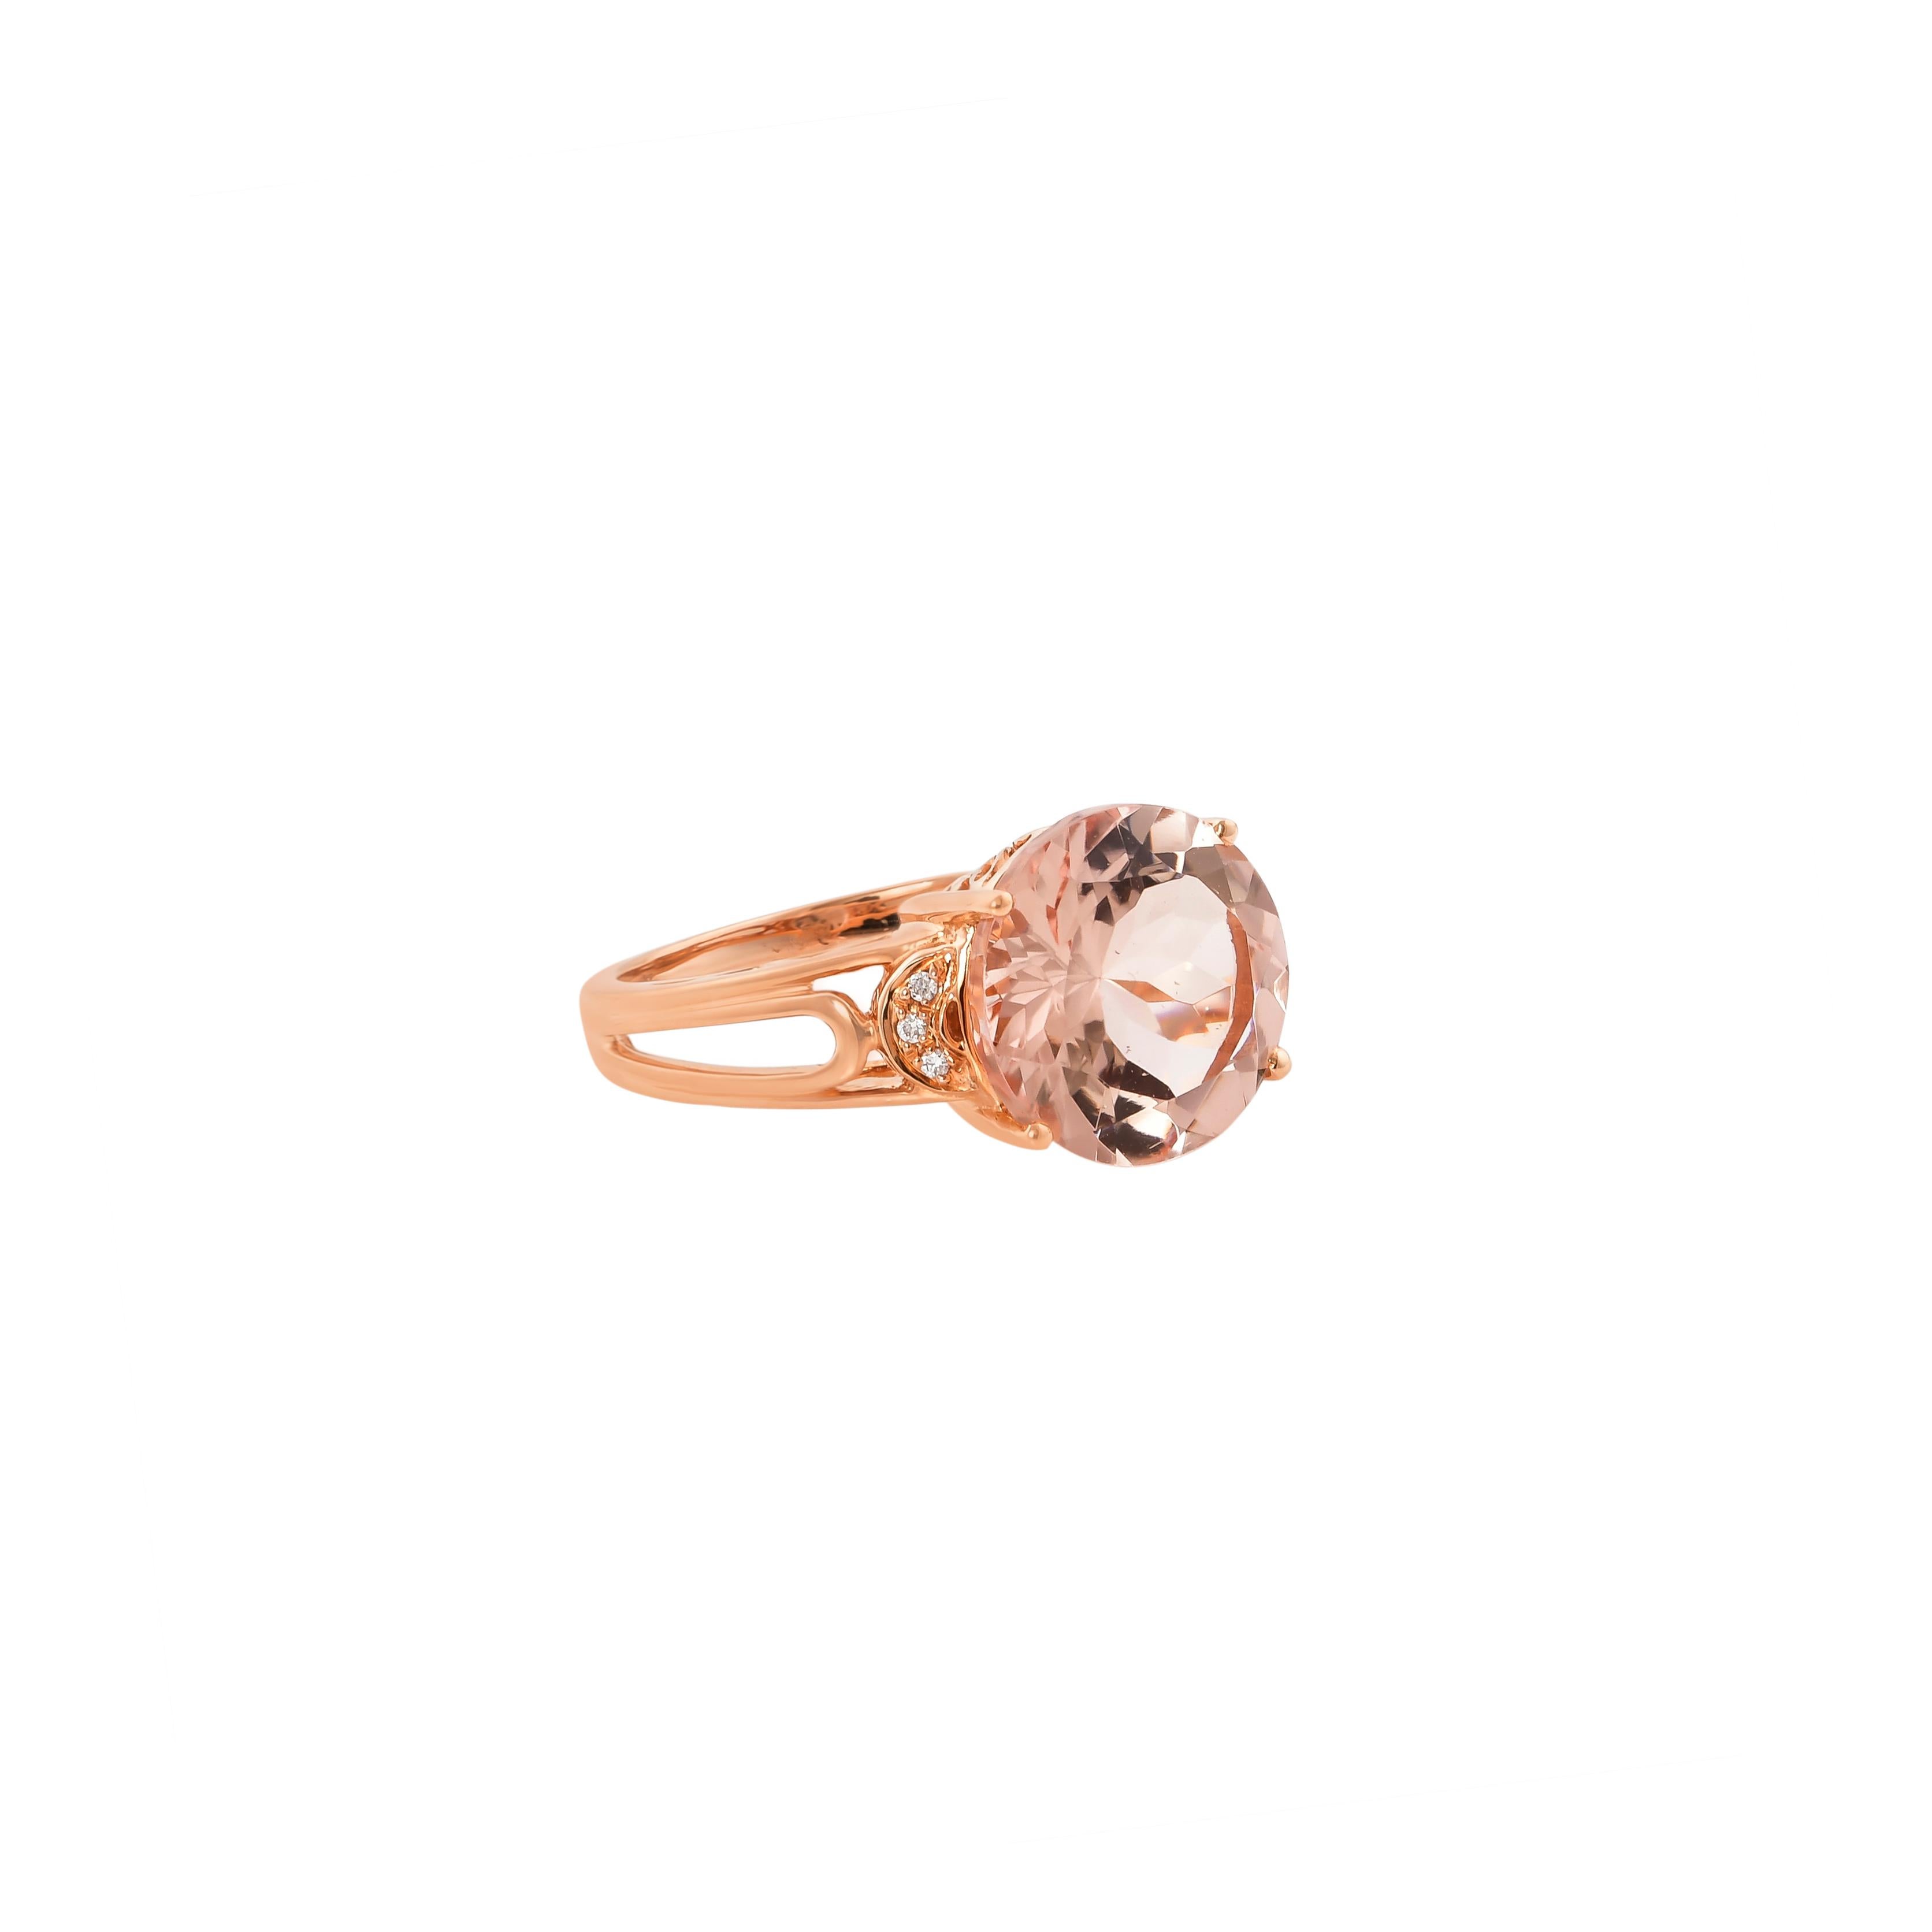 This collection features an array of magnificent morganites! Accented with diamonds these rings are made in rose gold and present a classic yet elegant look. 

Classic morganite ring in 18K rose gold with diamonds. 

Morganite: 5.98 carat round